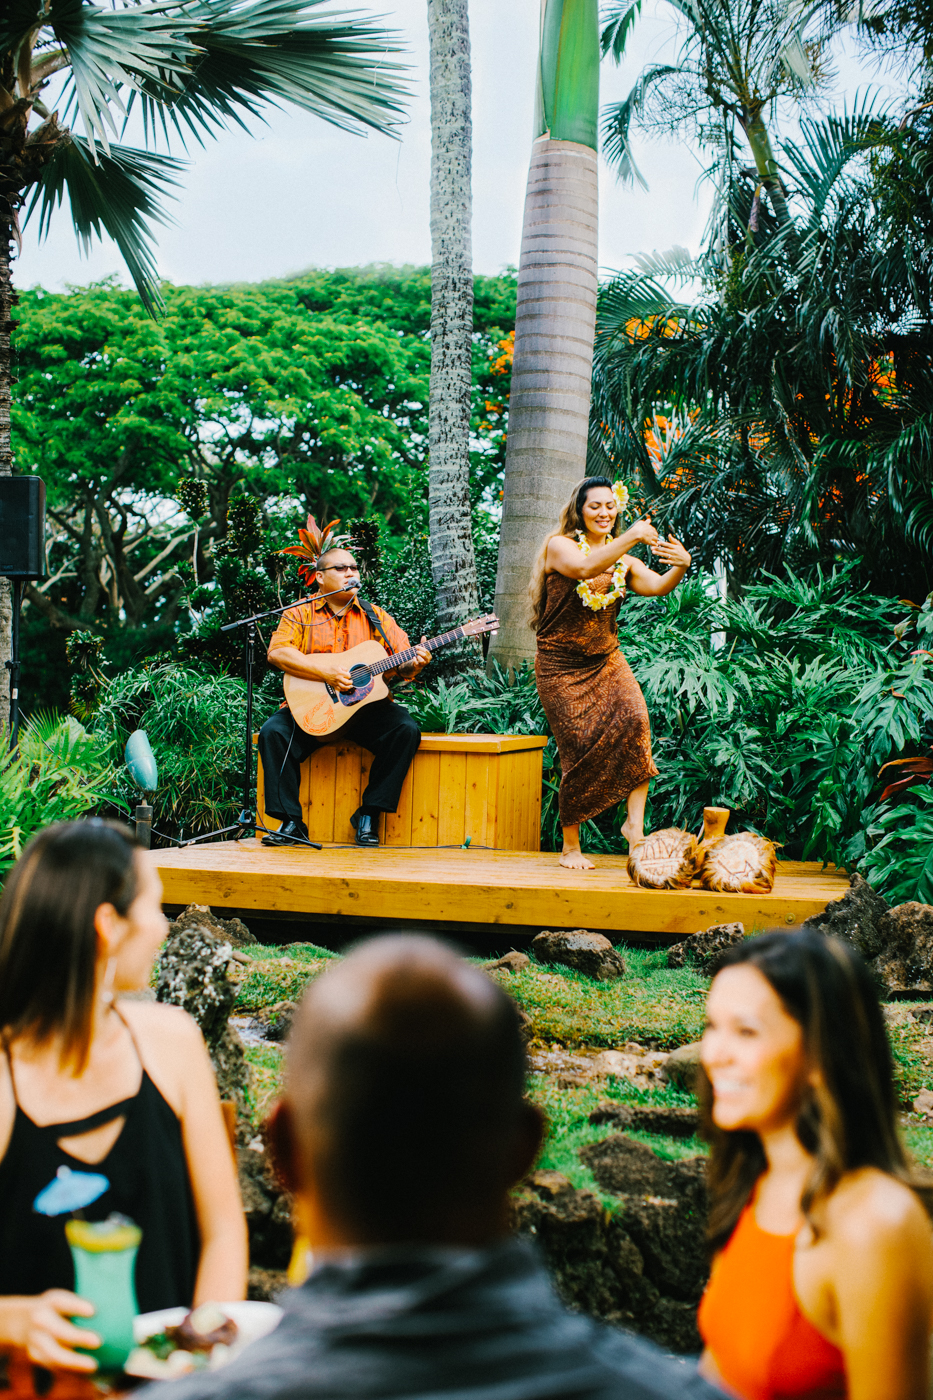 Group of people enjoying meal with live music and hula dancers in the background